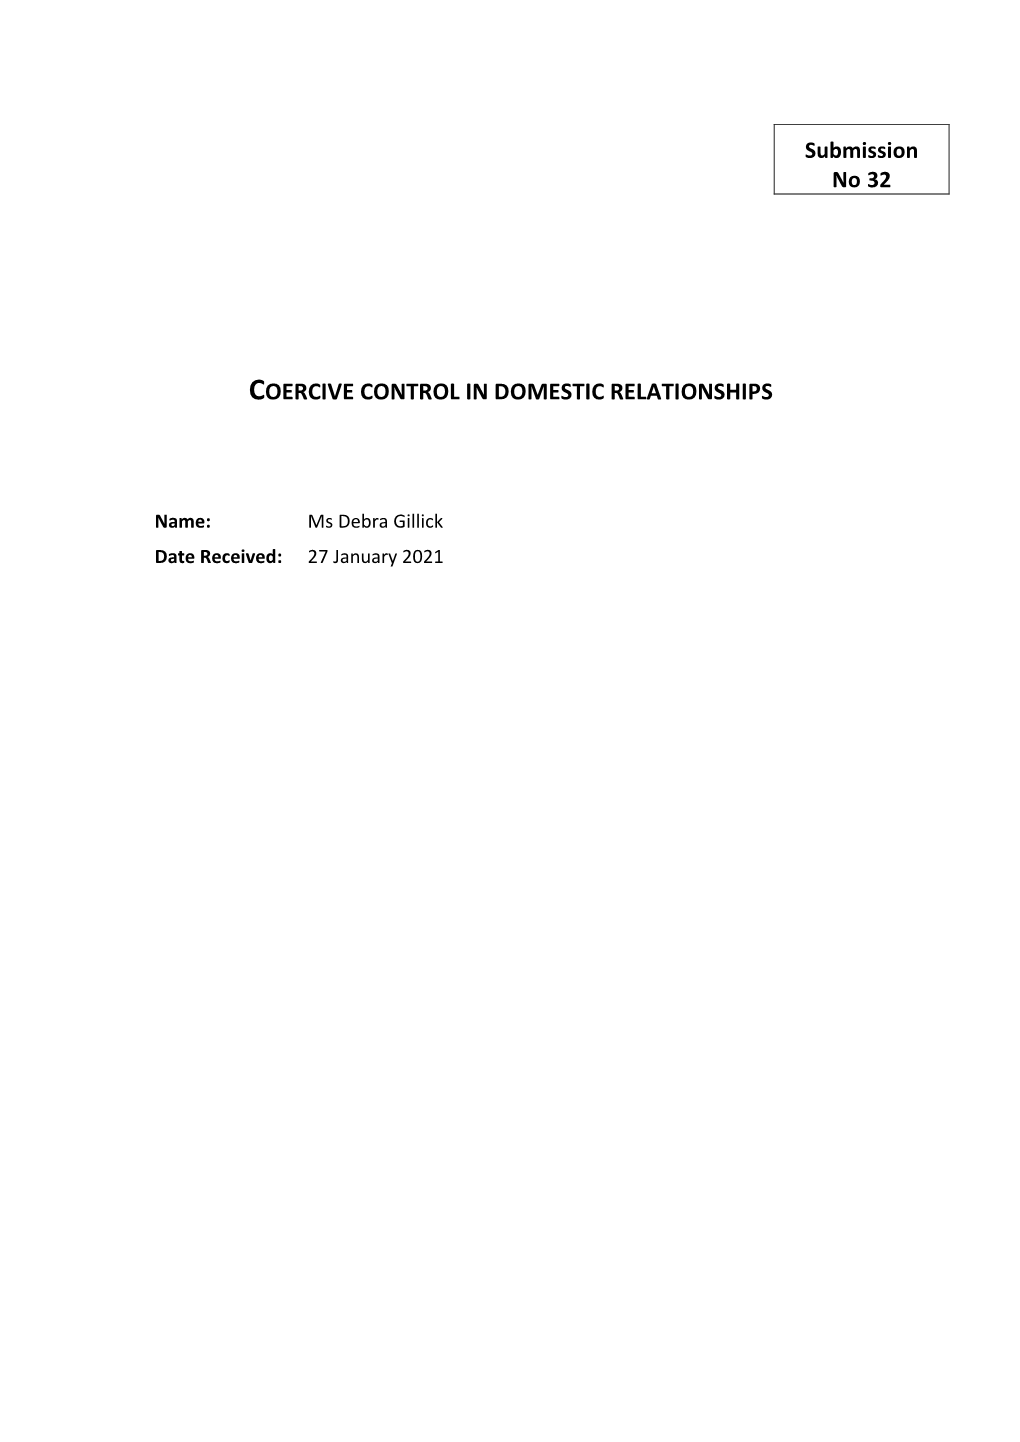 Submission No 32 COERCIVE CONTROL in DOMESTIC RELATIONSHIPS